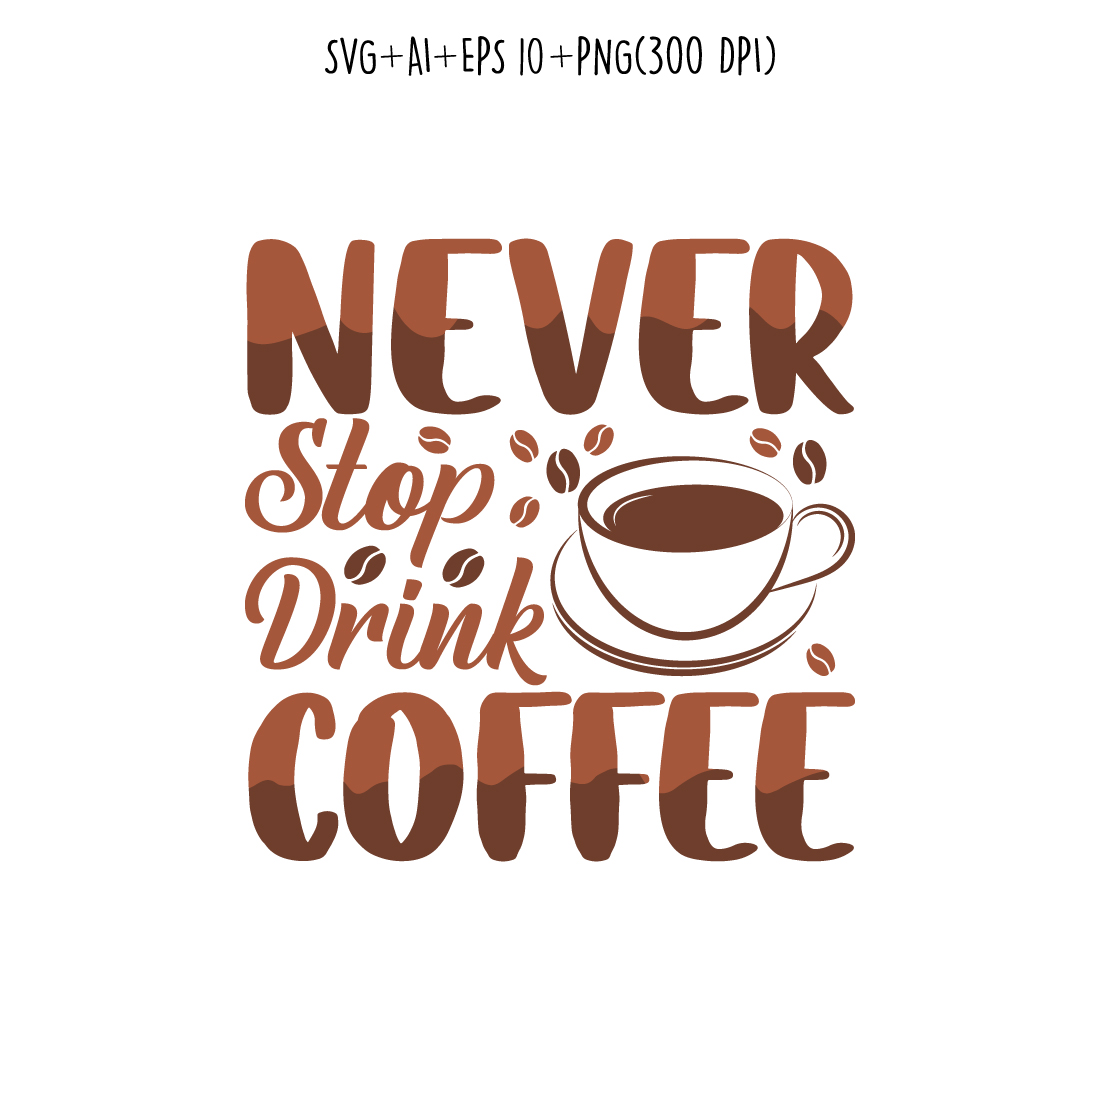 Never stop drink coffee” coffee typography for t-shirts, print, templates, logos, mug preview image.